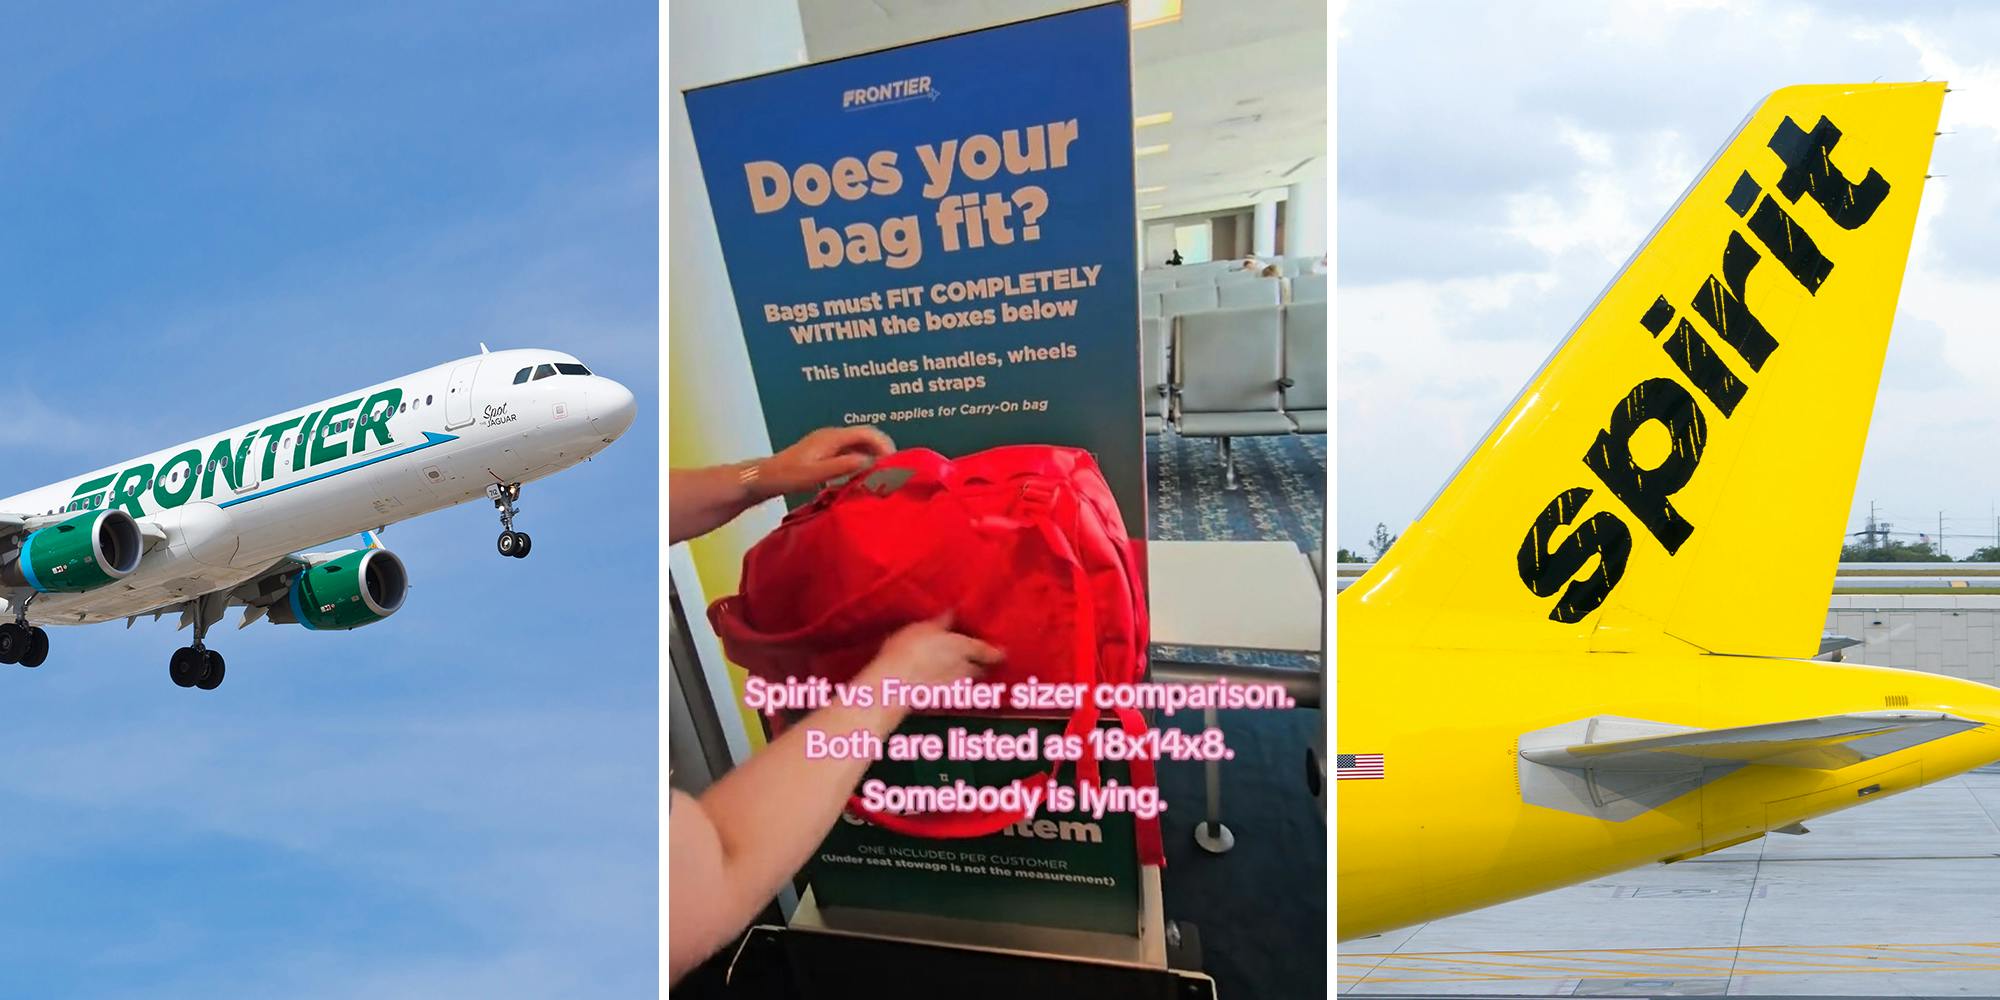 Traveler says Spirit, Frontier may be falsely advertising bag sizers after her carry-on only fits one